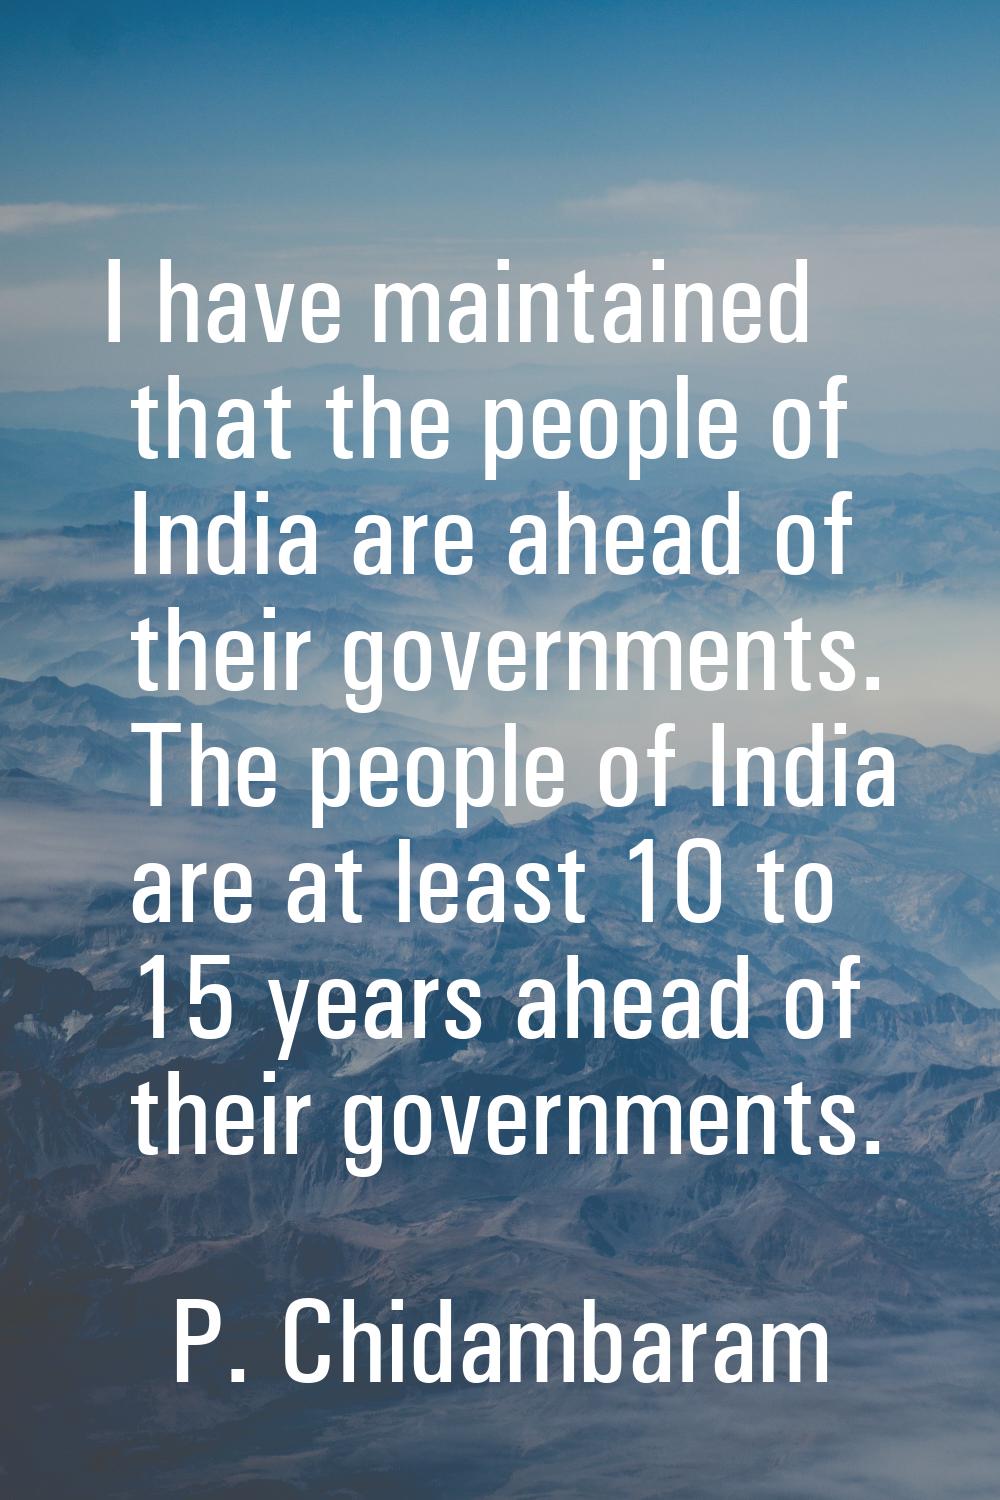 I have maintained that the people of India are ahead of their governments. The people of India are 